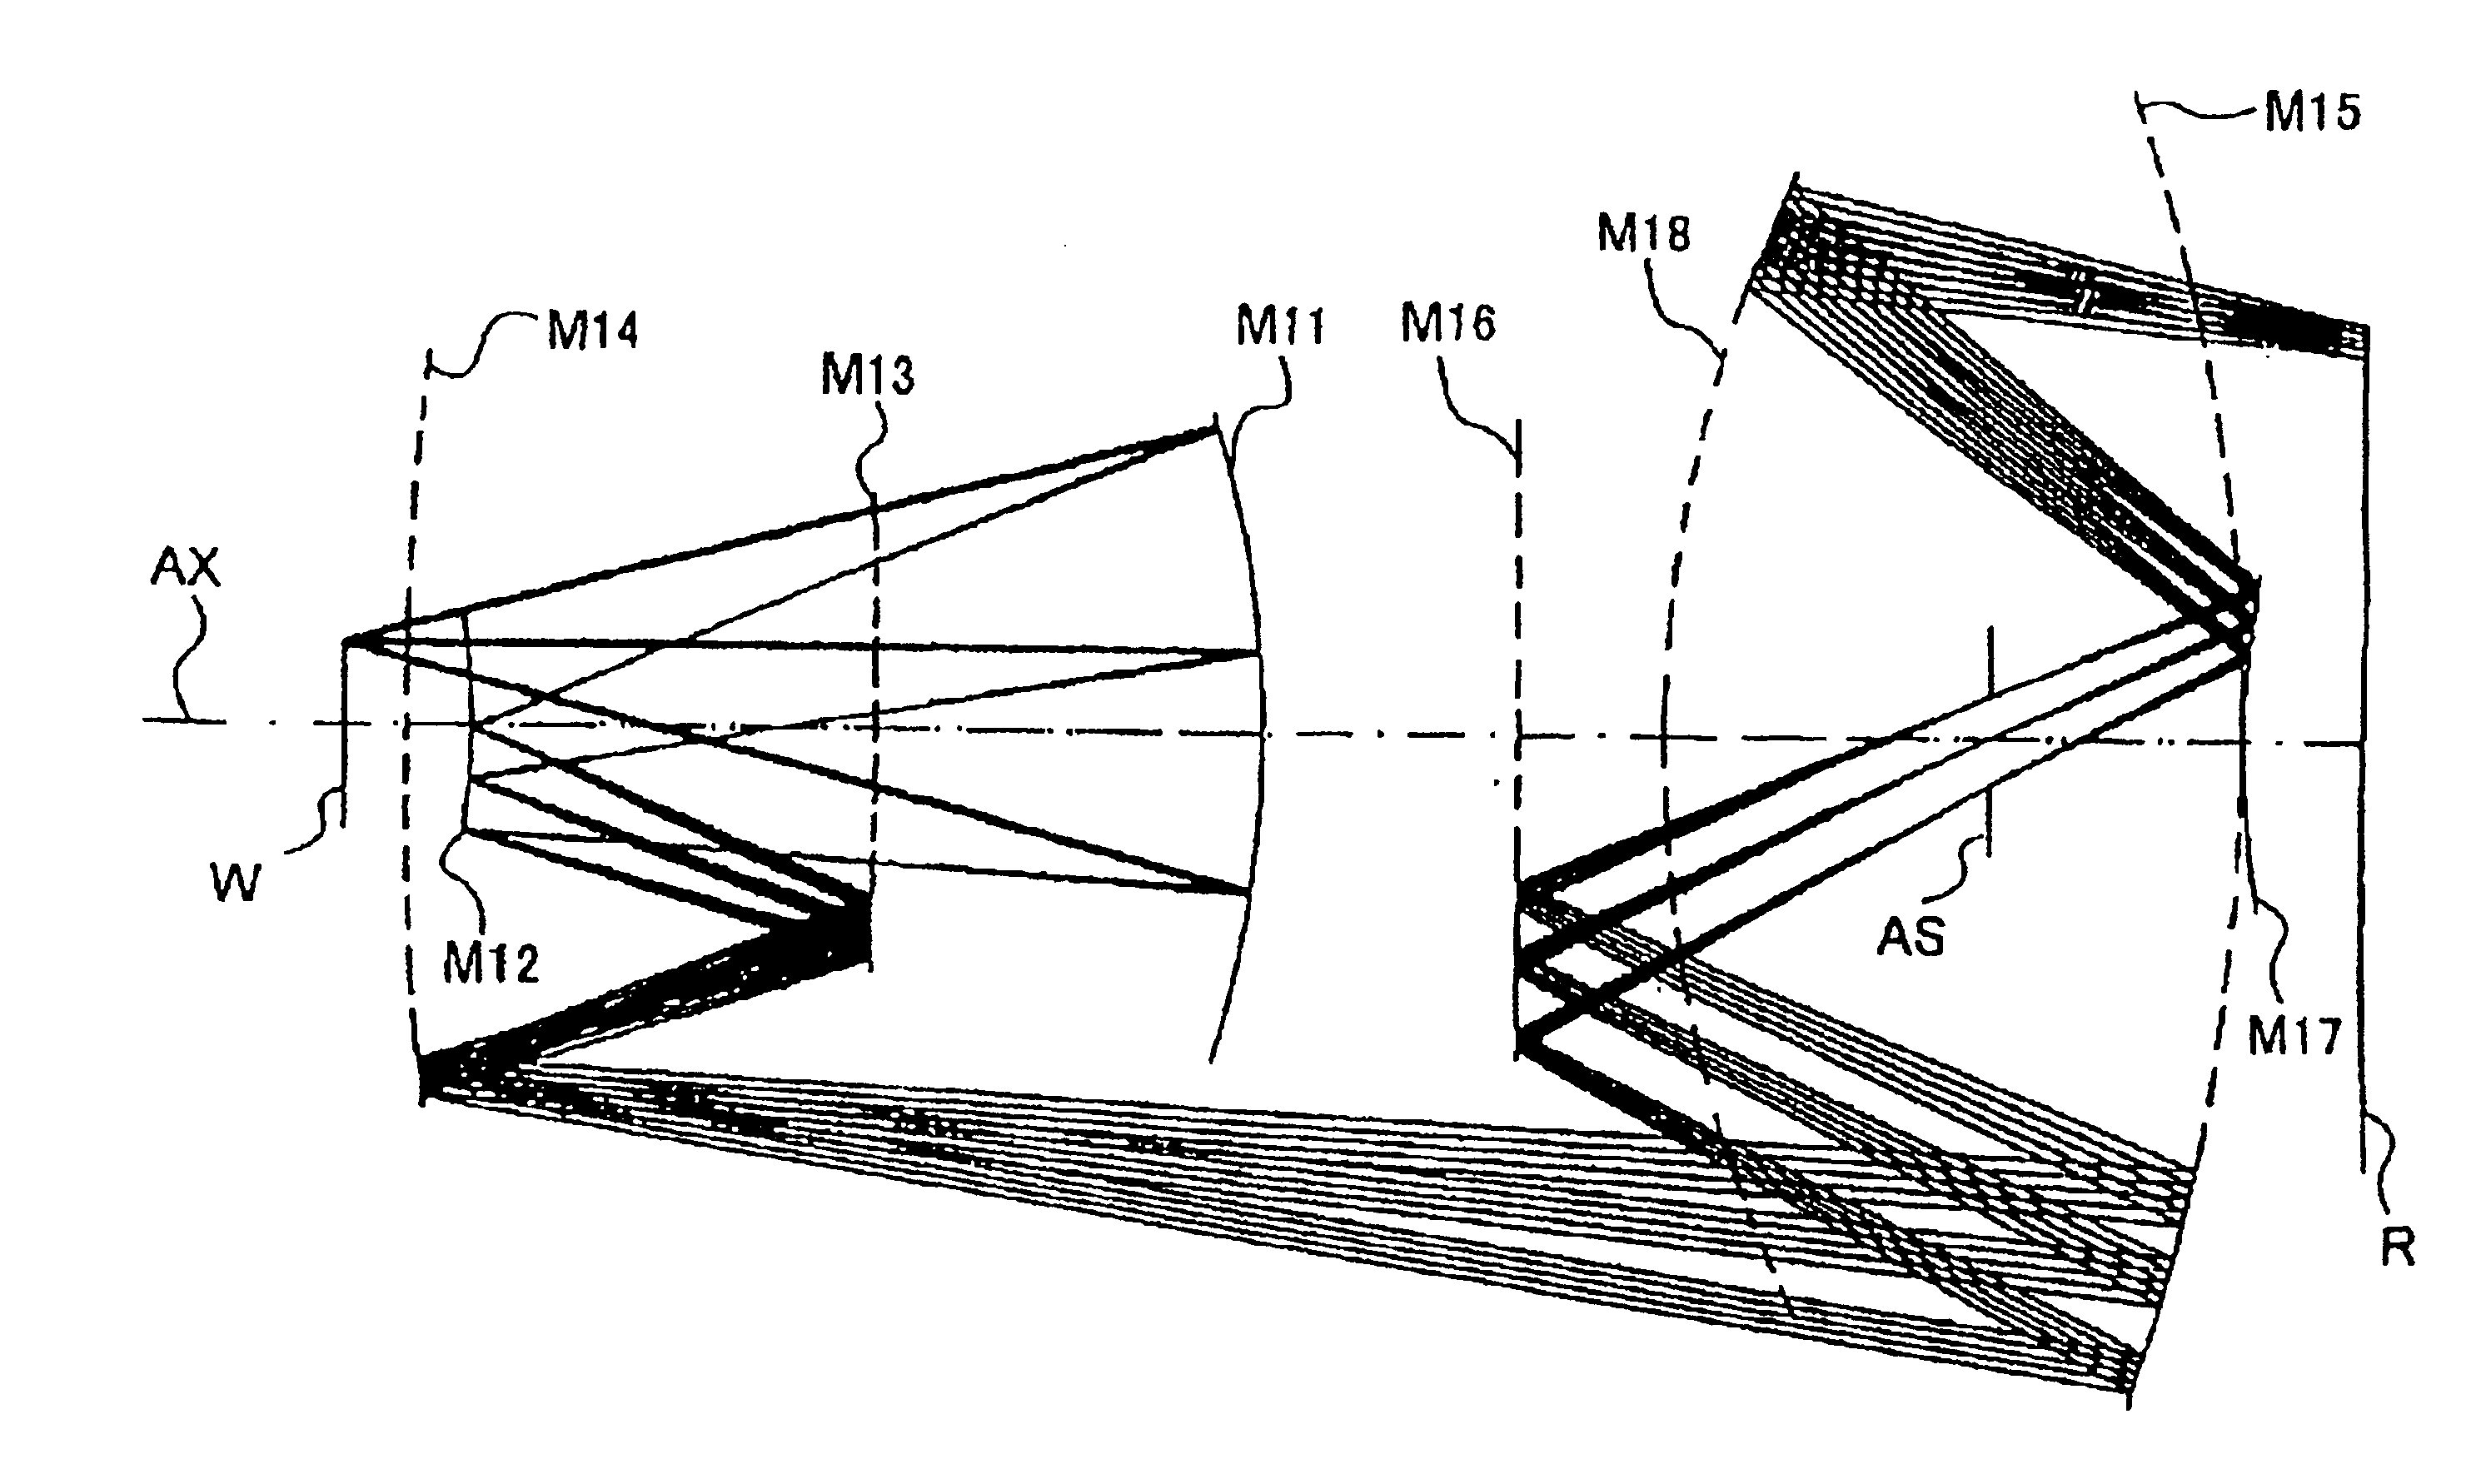 Imaging optical system and exposure apparatus